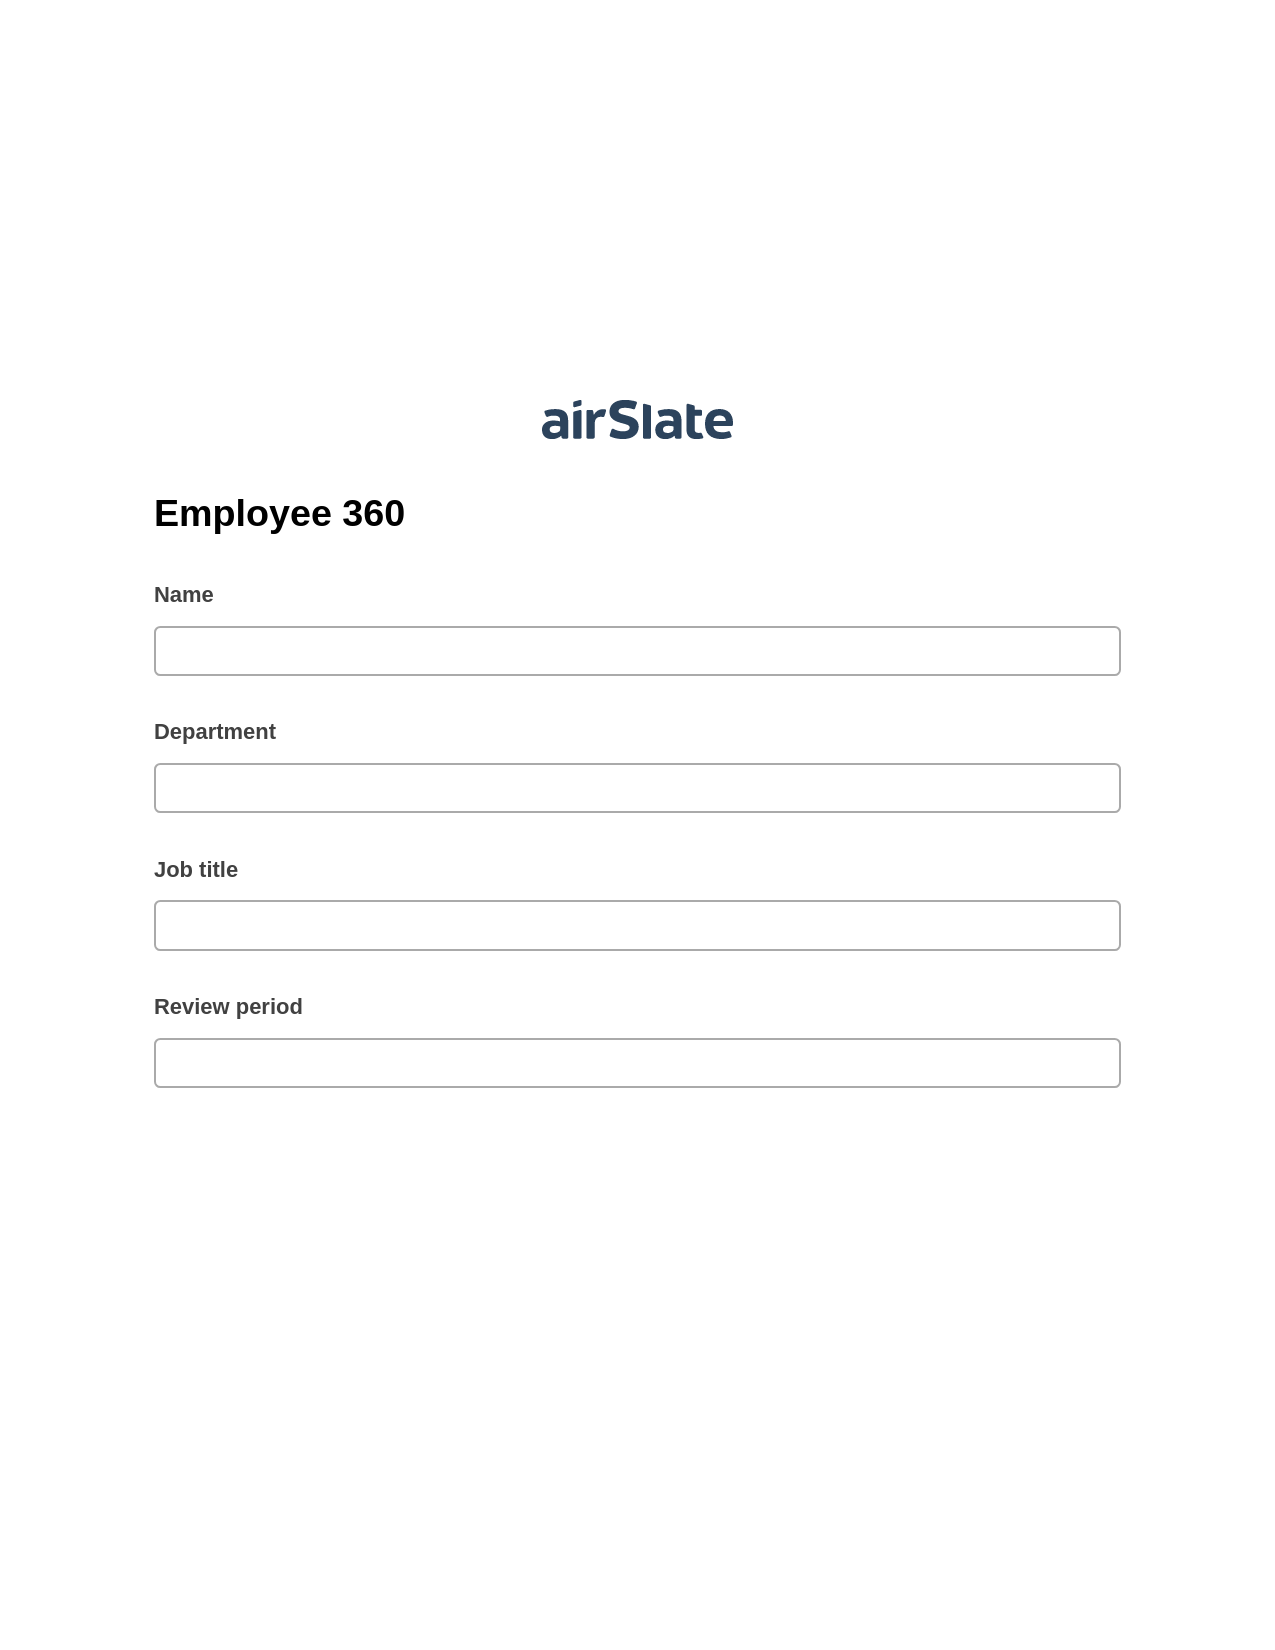 Employee 360 Pre-fill from Salesforce Records Bot, Invoke Salesforce Process Bot, Export to Excel 365 Bot